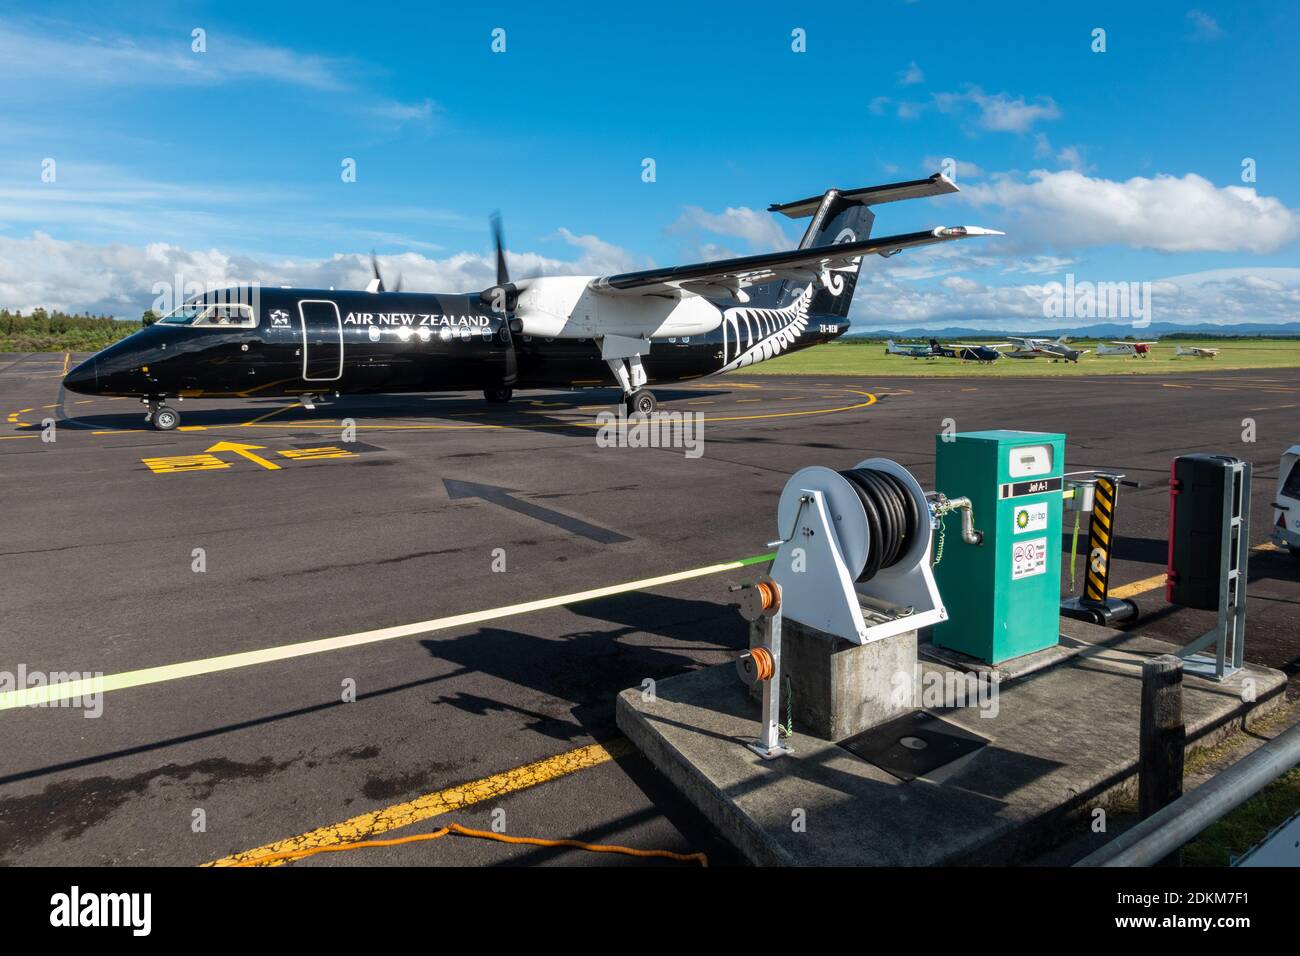 A Bombardier Dash 8 Q300 series painted in all black colors starts up next to a Jet A1 fuel pump at Taupo Airport, New Zealand Stock Photo